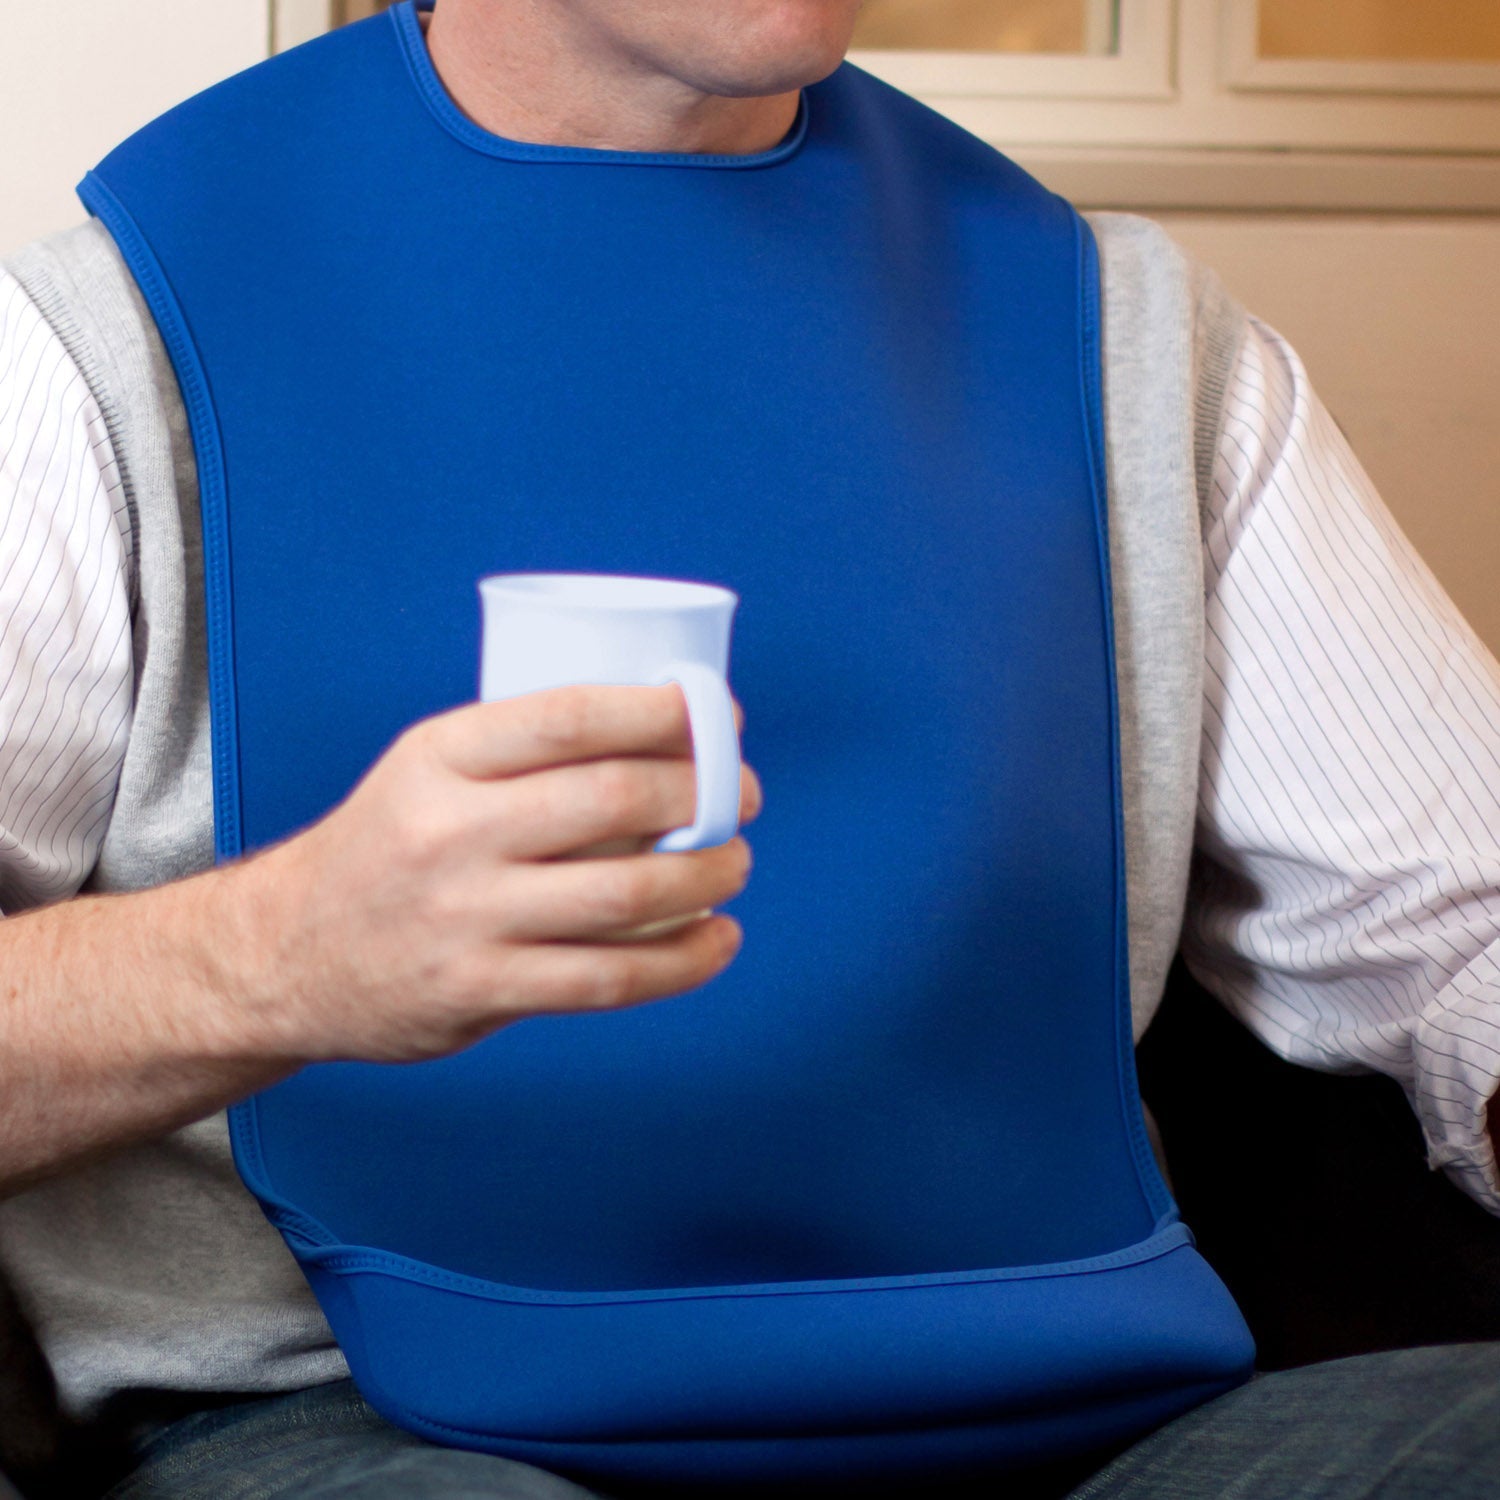 CareDesign_large_tabard_for_special_needs_adult_wearing_a_blue_bib_with_feeding_pouch